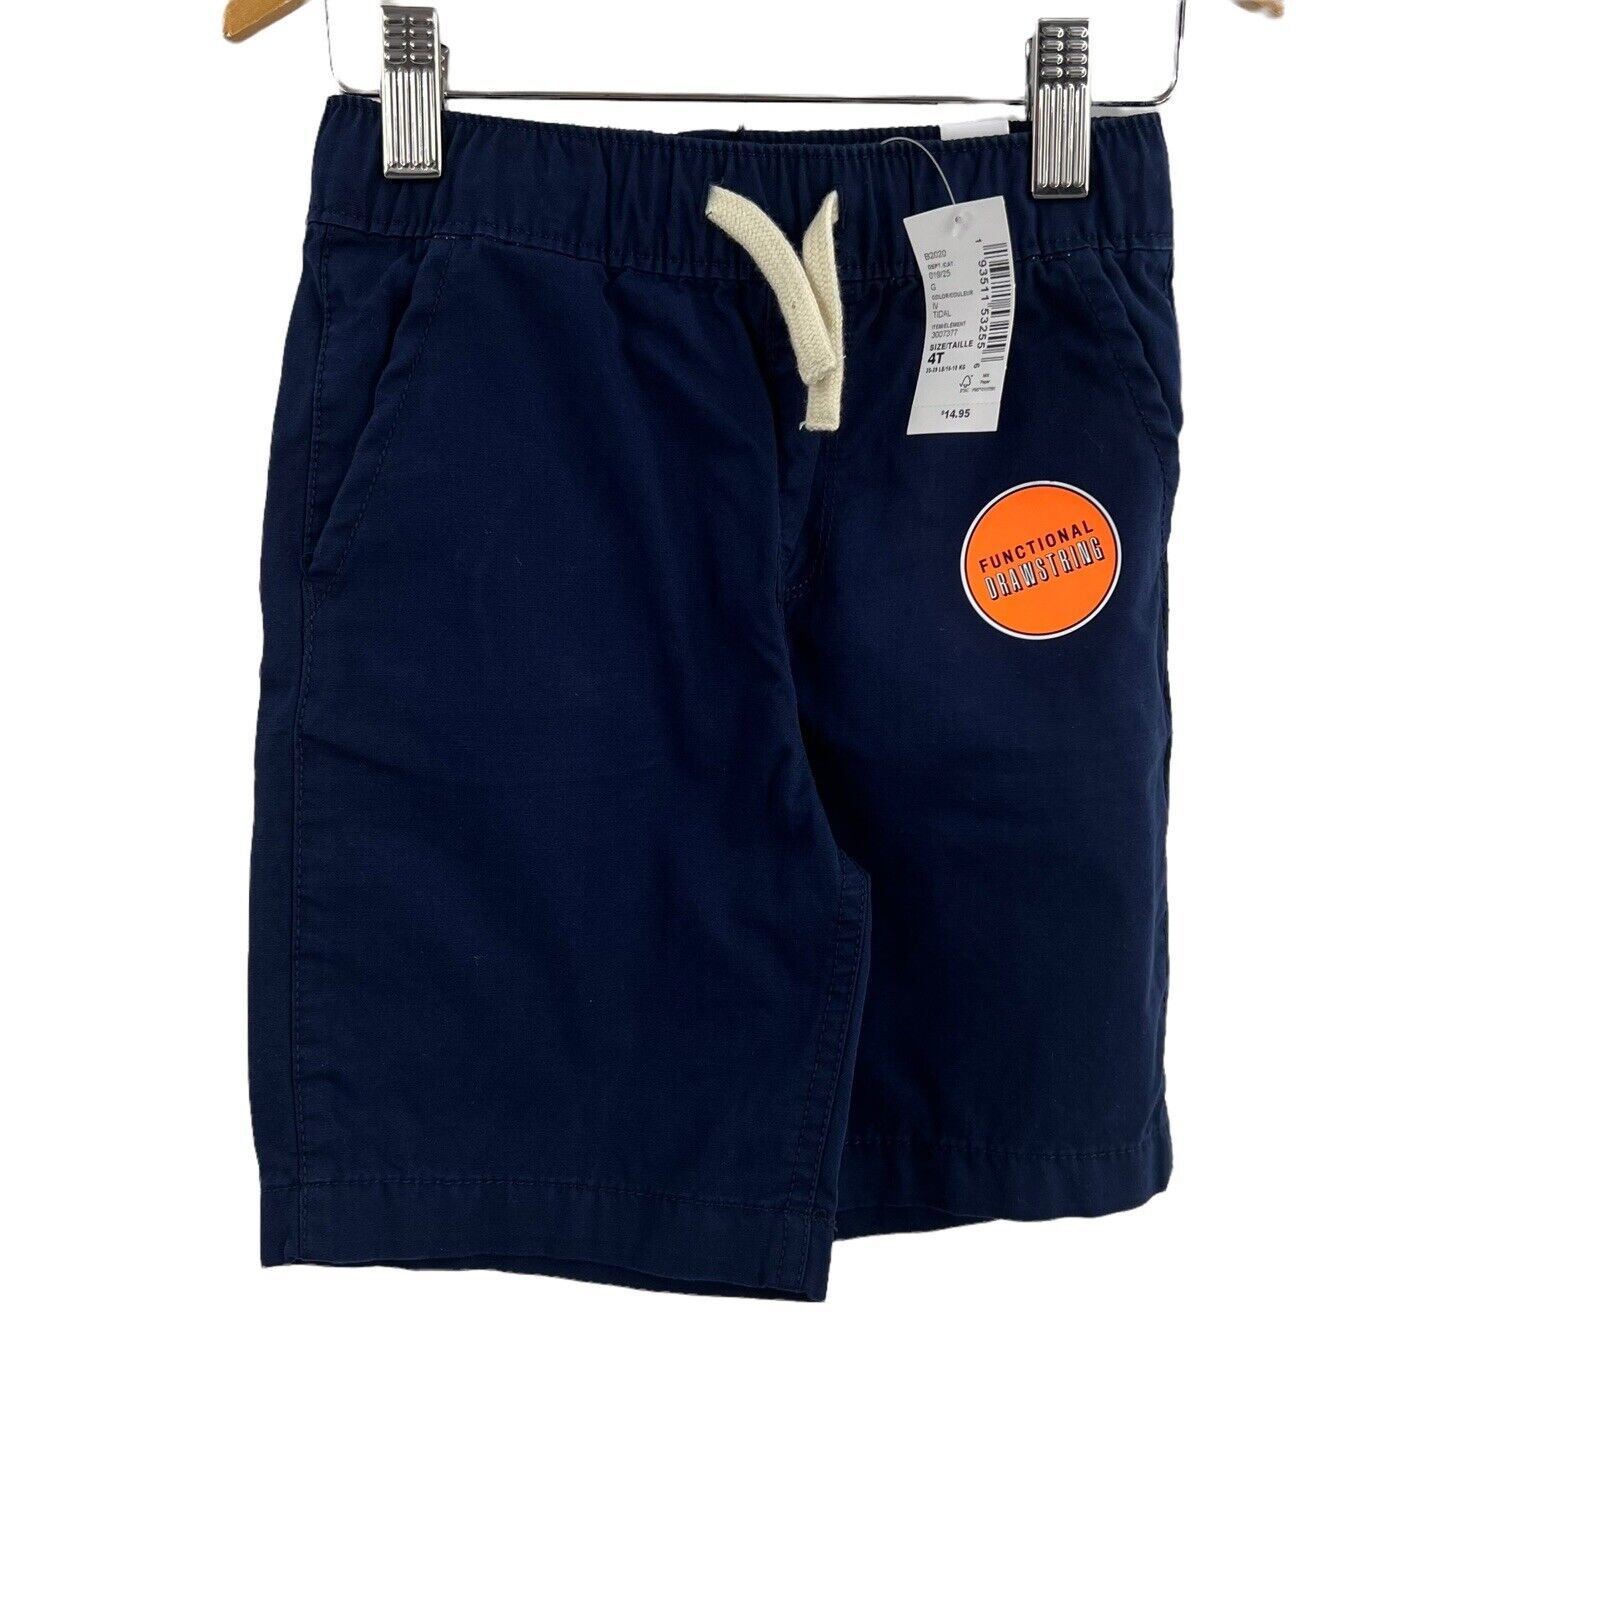 Childrens Place Navy Pull On Short Size 4T New - $8.23